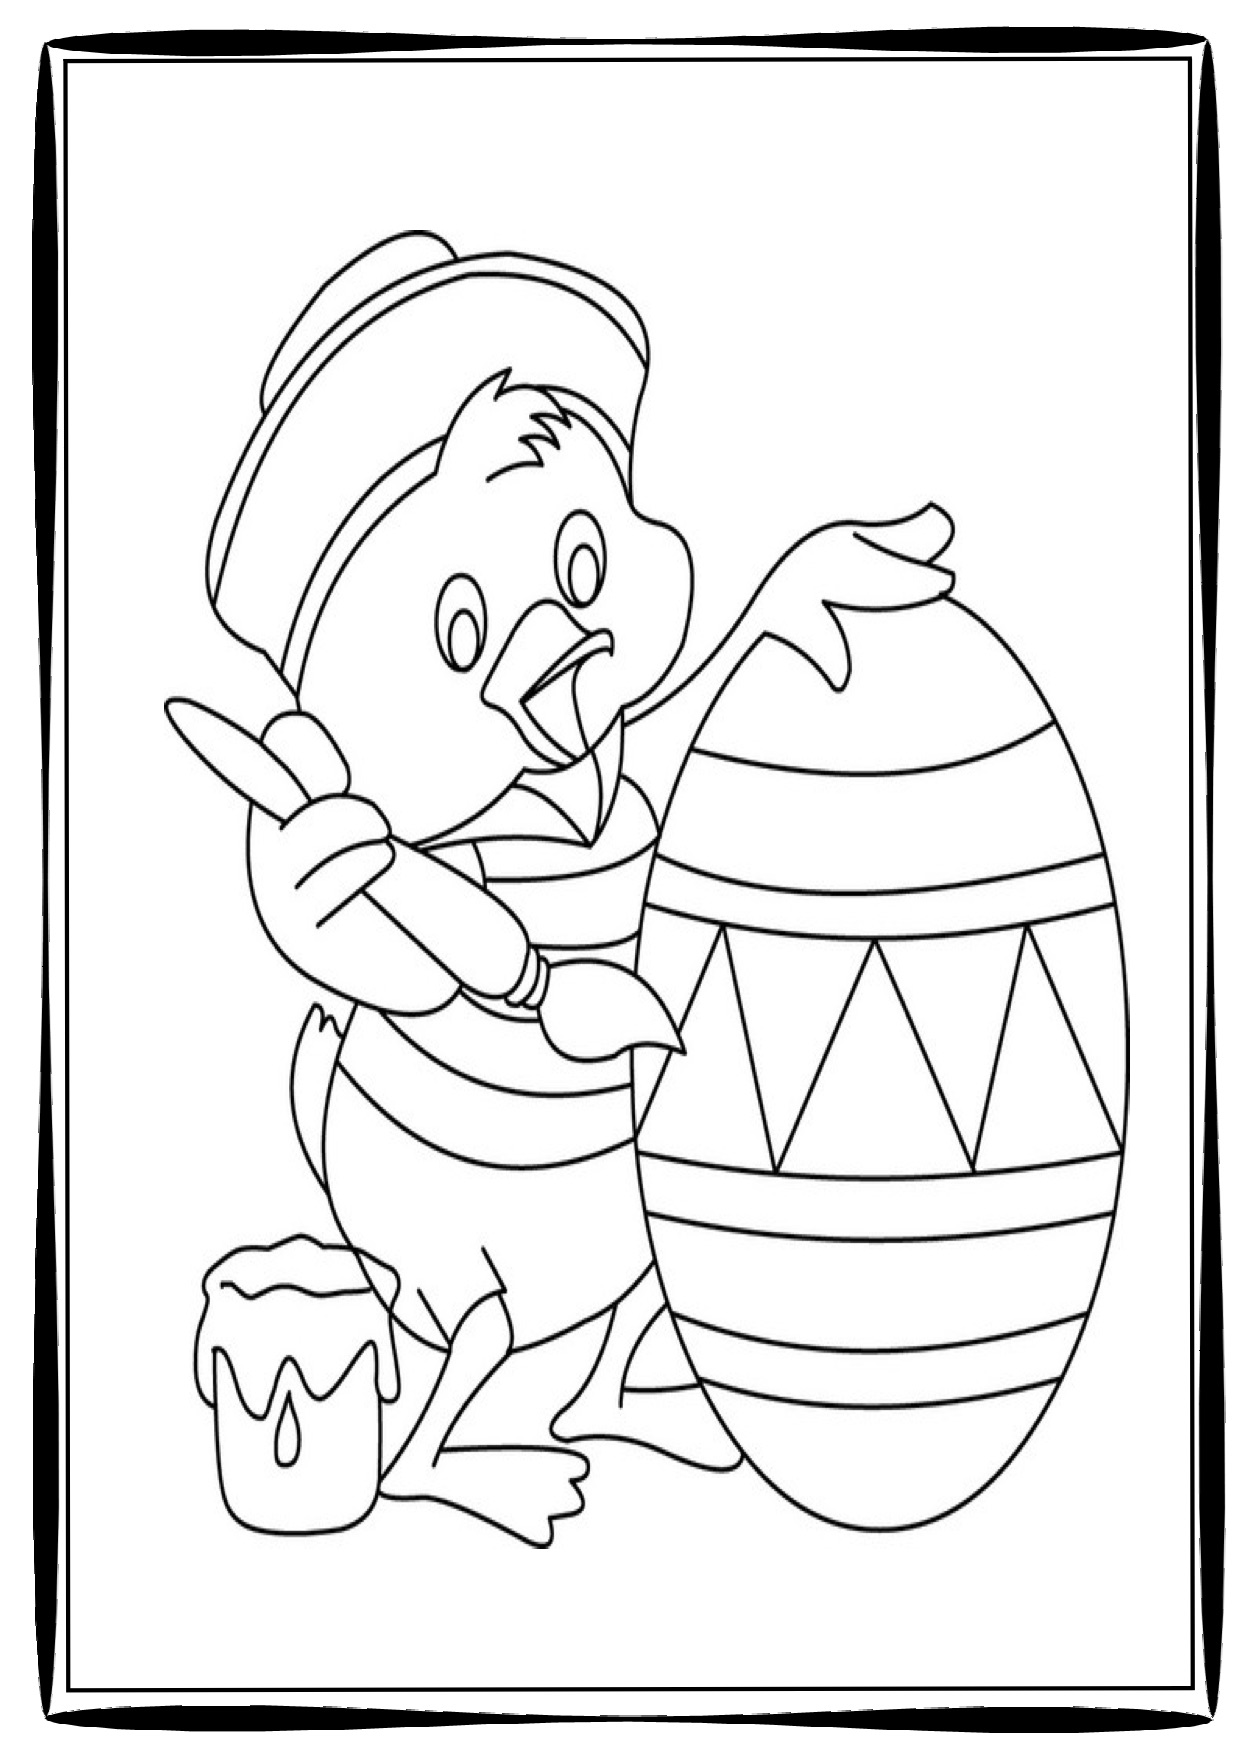 Free Printable Easter Activities Image